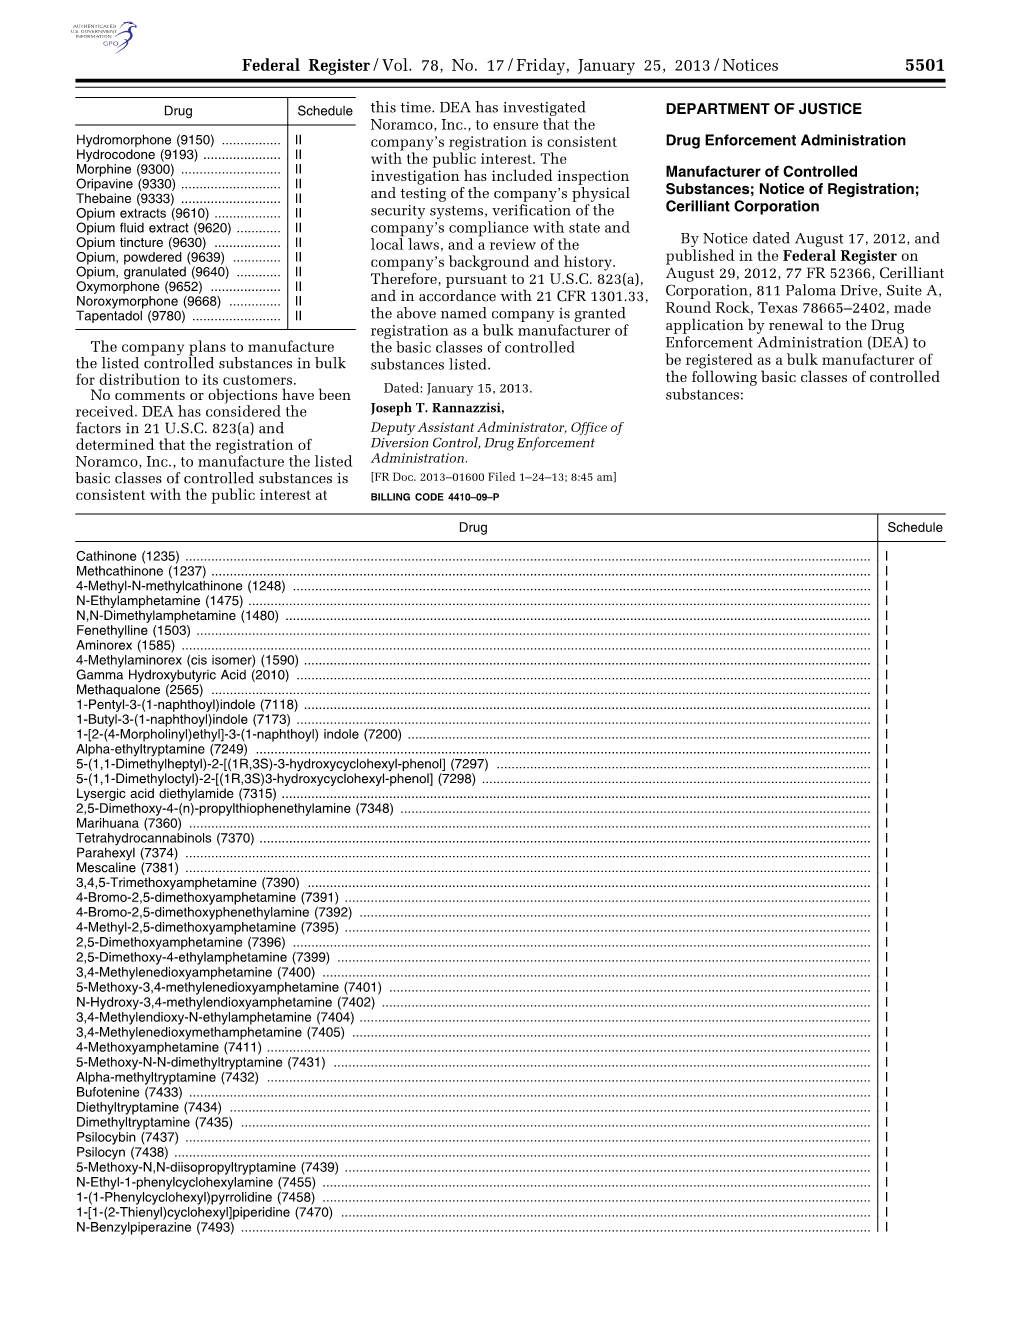 Federal Register/Vol. 78, No. 17/Friday, January 25, 2013/Notices